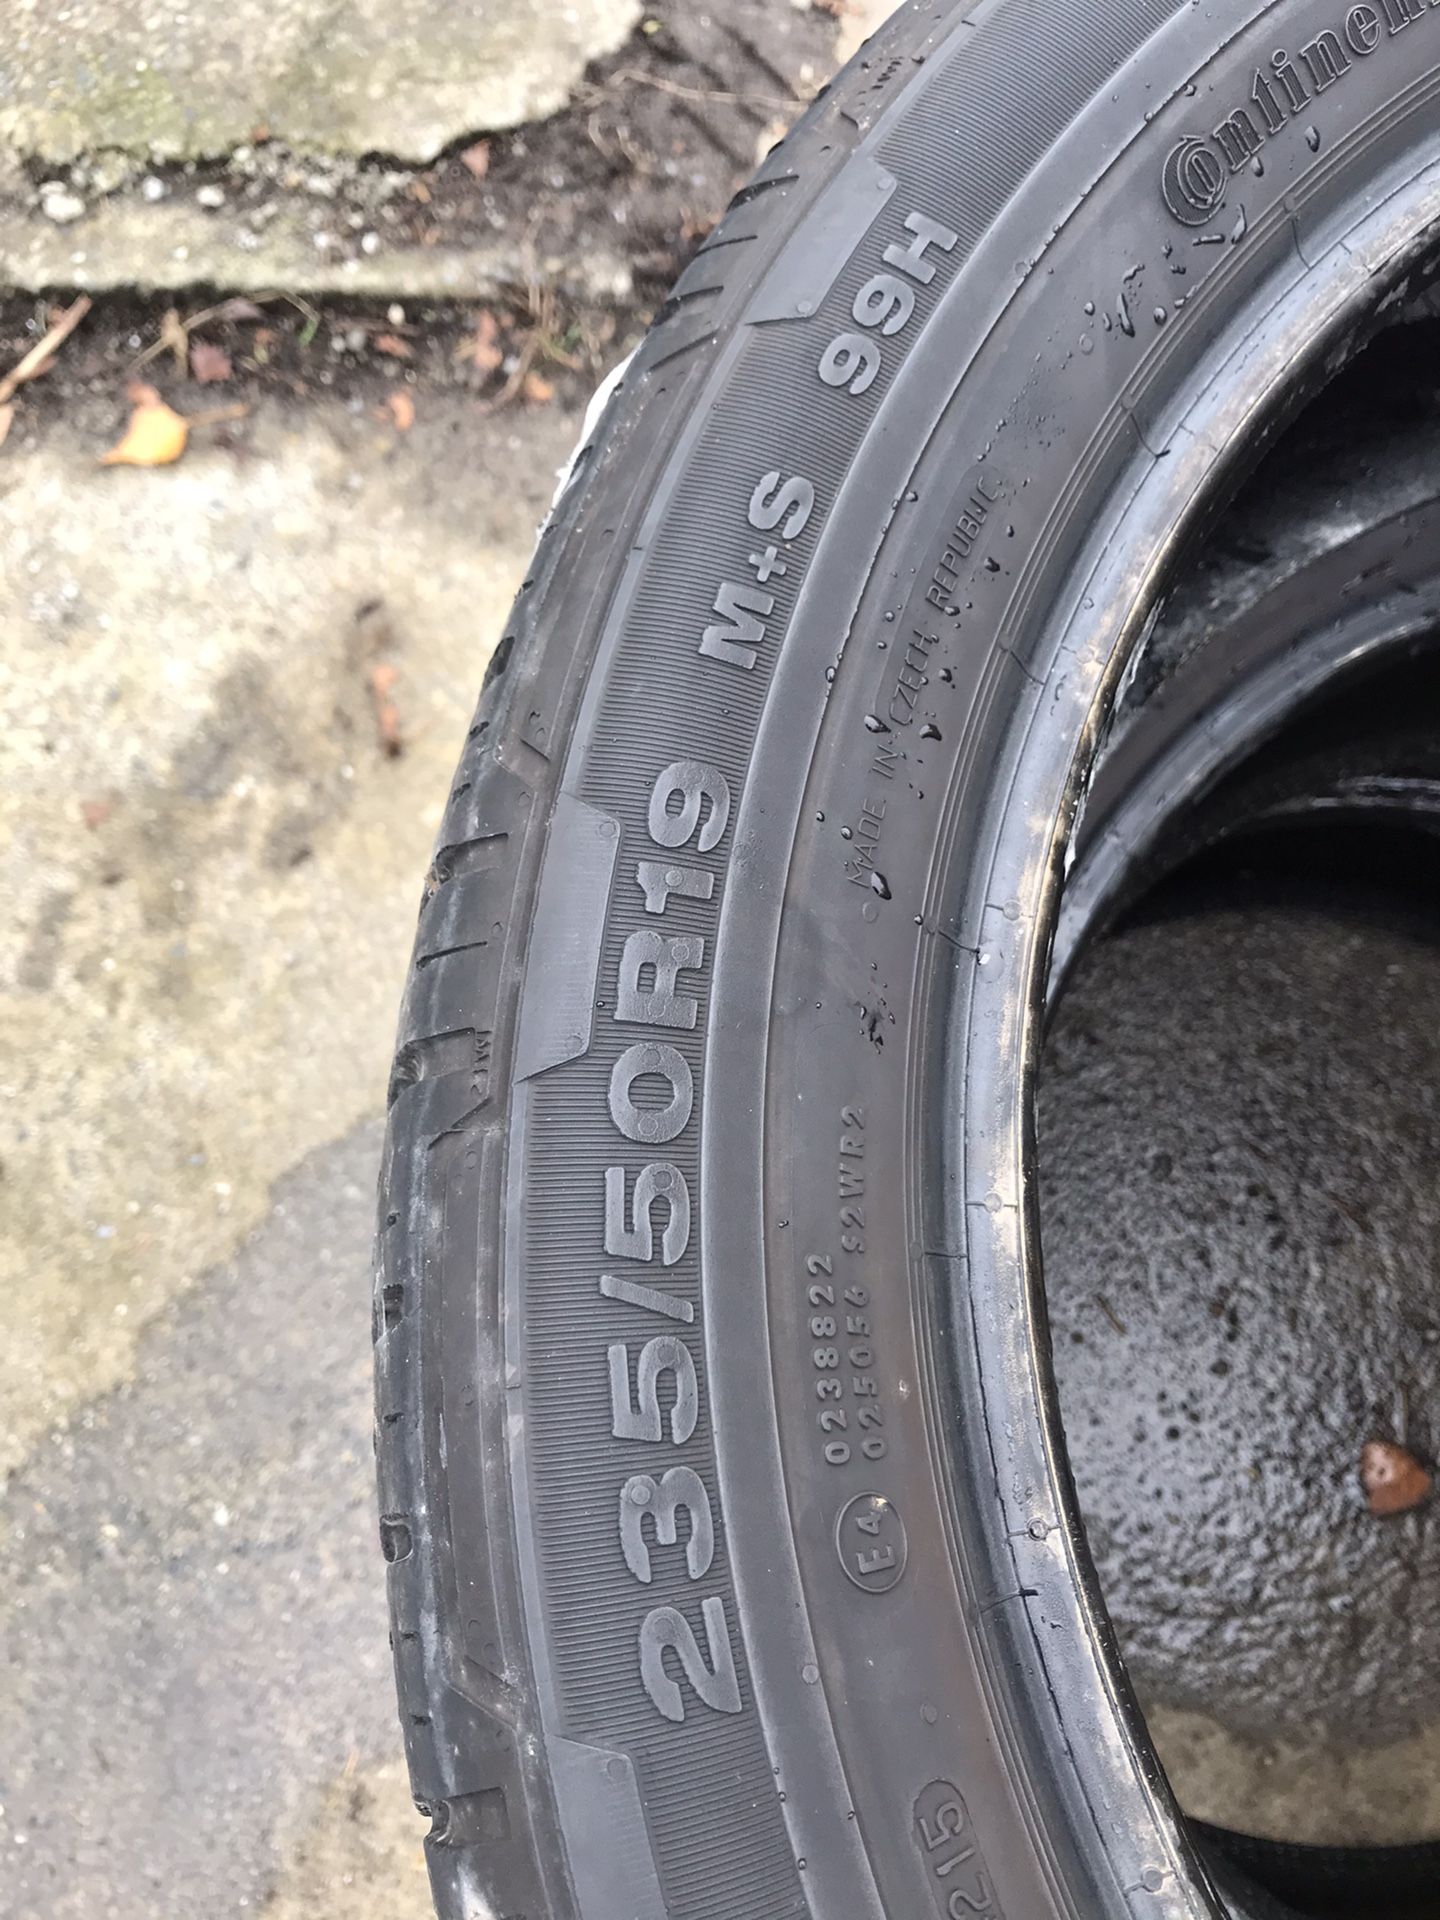 Tires 235/50 R19 Continental - quantity 3 will sell all three, two or separate